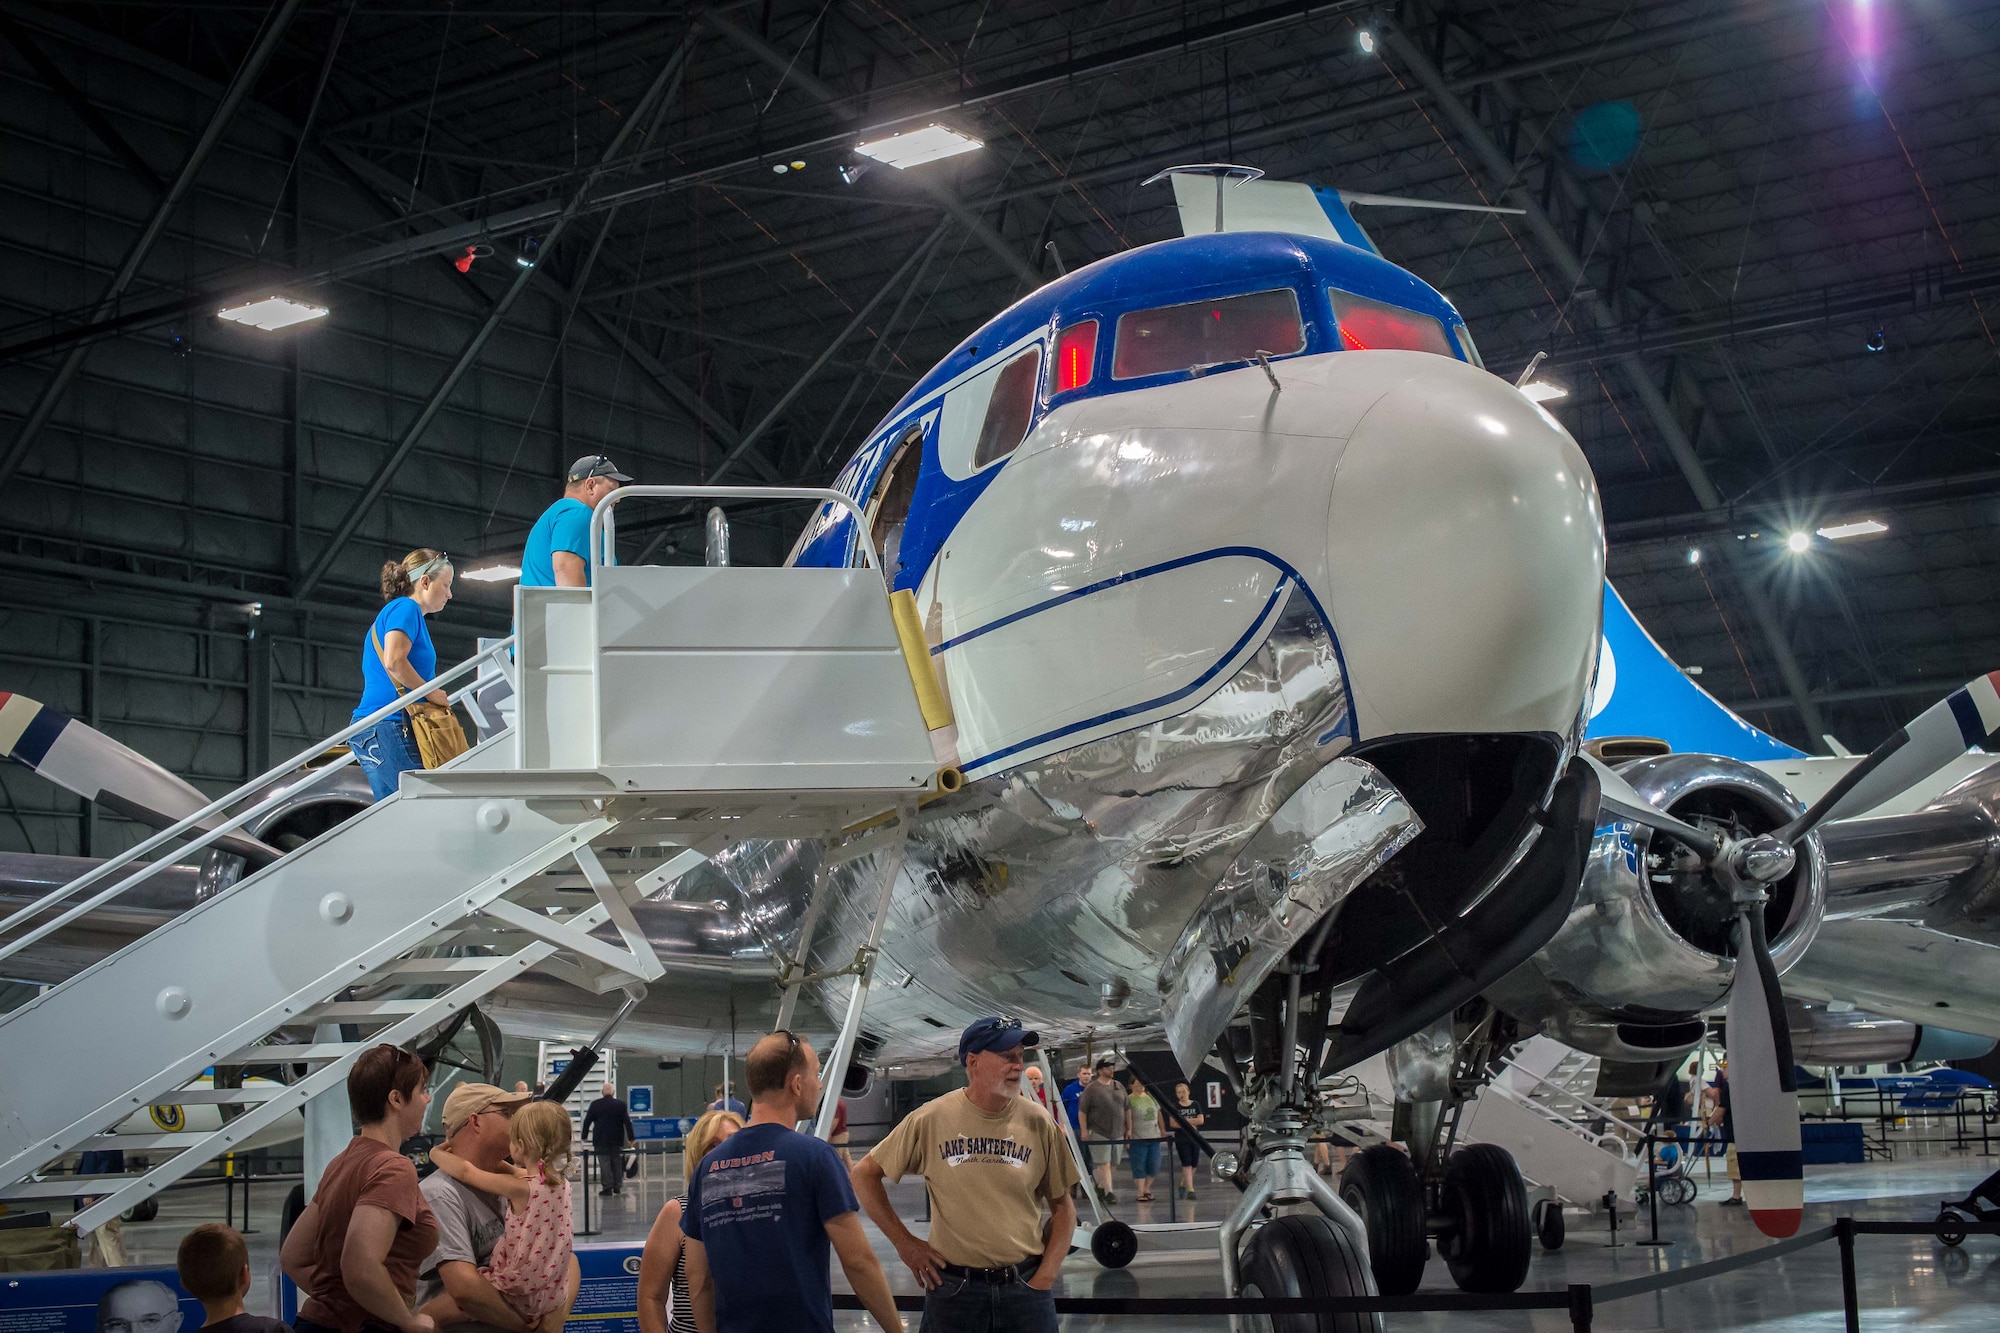 DAYTON, Ohio -- The Douglas VC-118 “Independence” on display in the Presidential Gallery at the National Museum of the United States Air Force. (U.S. Air Force photo by Jim Copes)